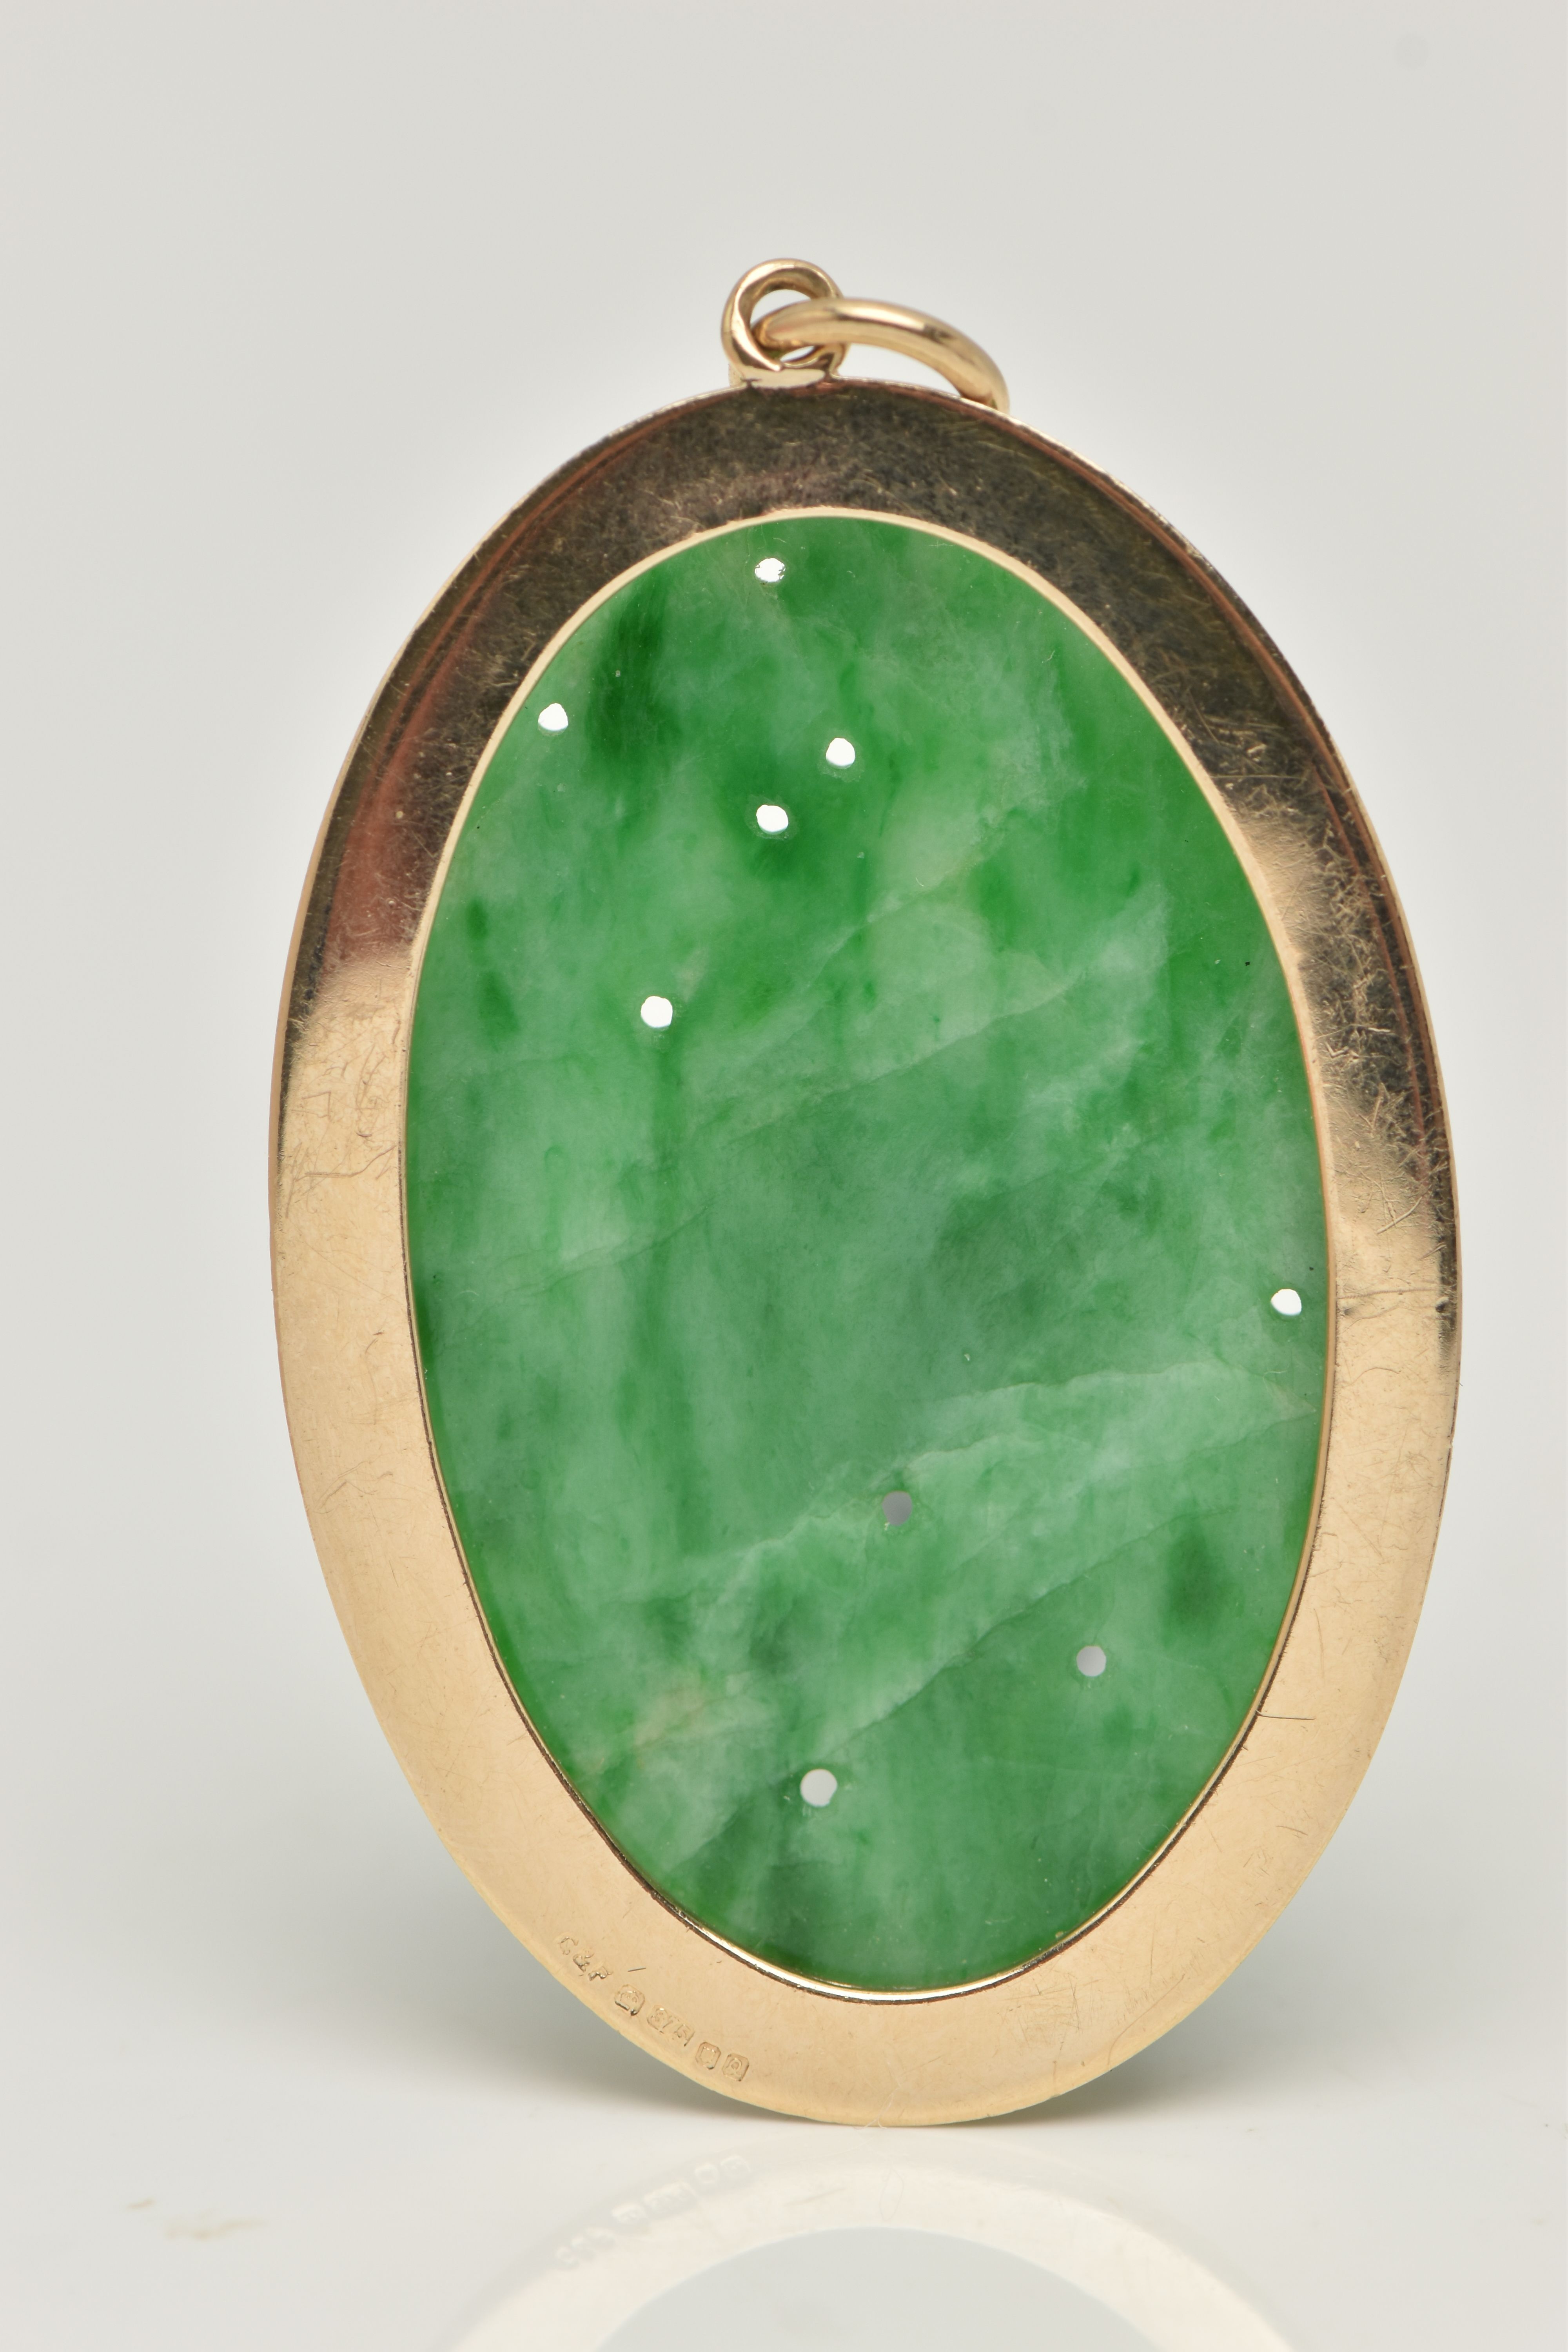 A 9CT GOLD CARVED JADE PENDANT, the oval jade panel carved to depict flowers, foliage and possibly - Image 2 of 4